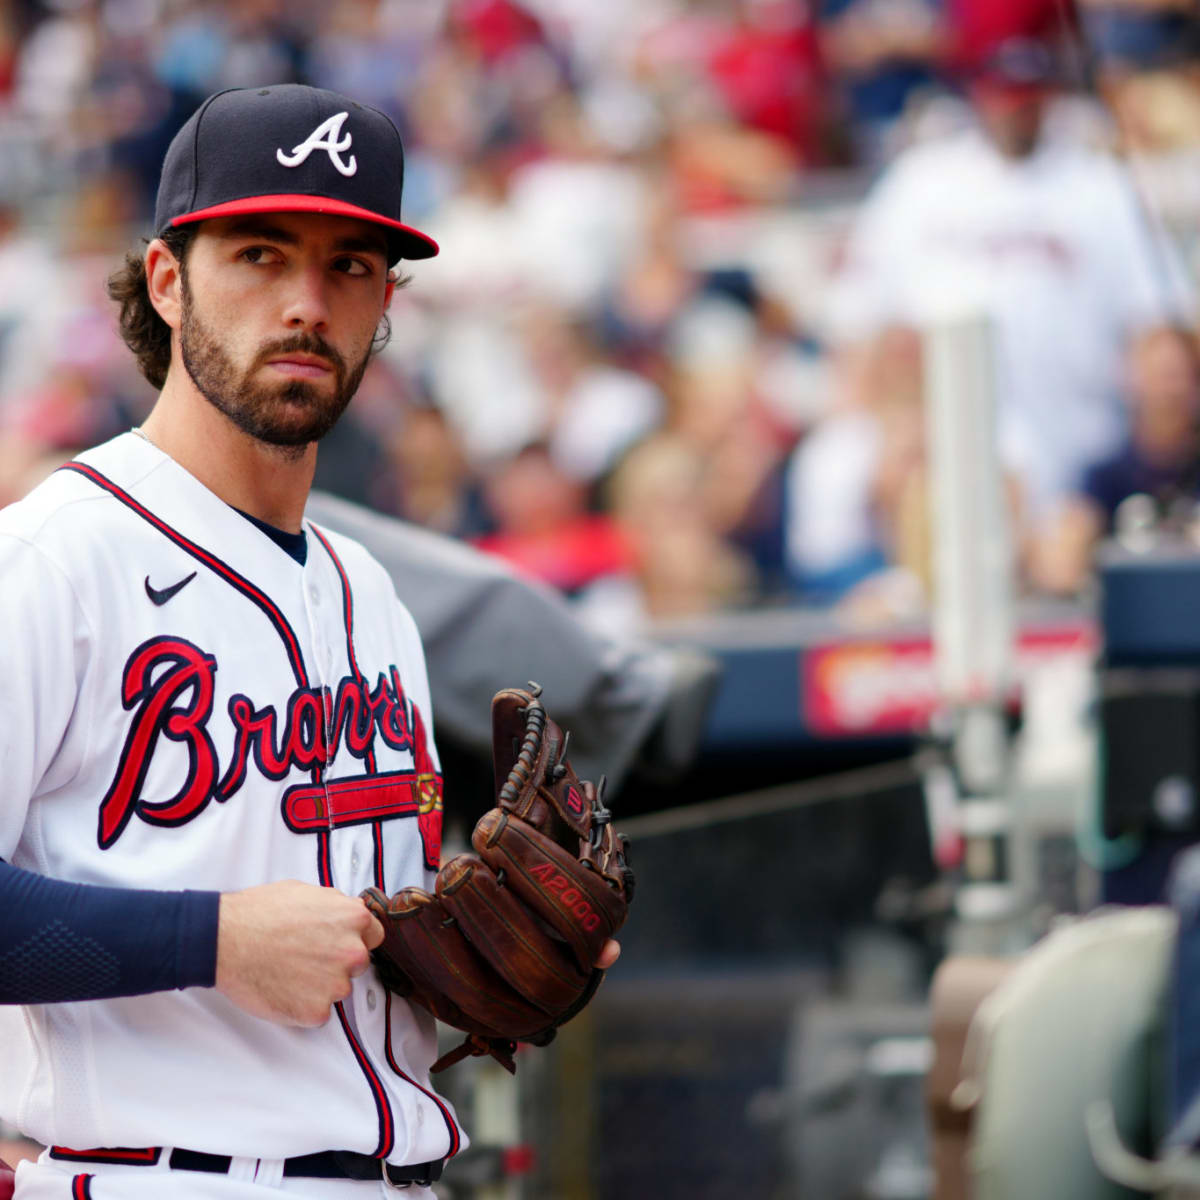 Dansby Swanson is Looking Like One of MLB's Best All-Around